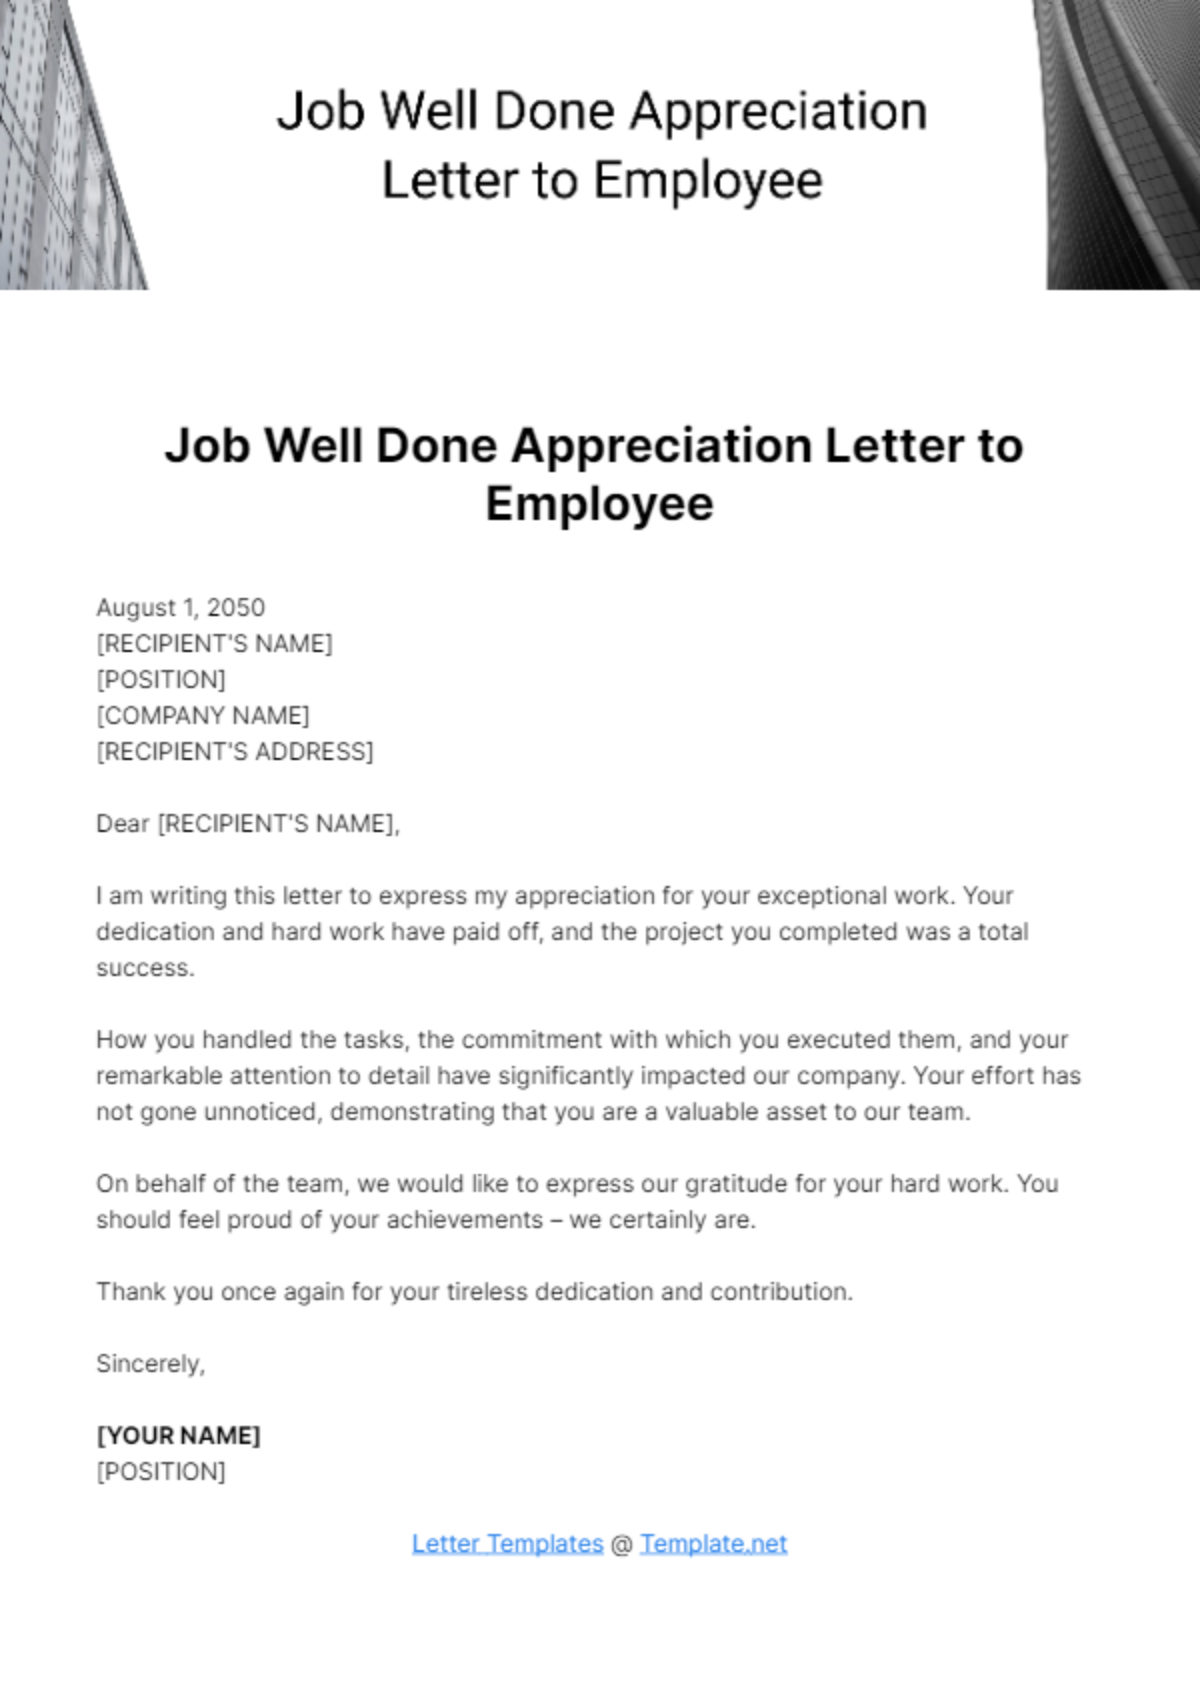 Free Job Well Done Appreciation Letter to Employee Template